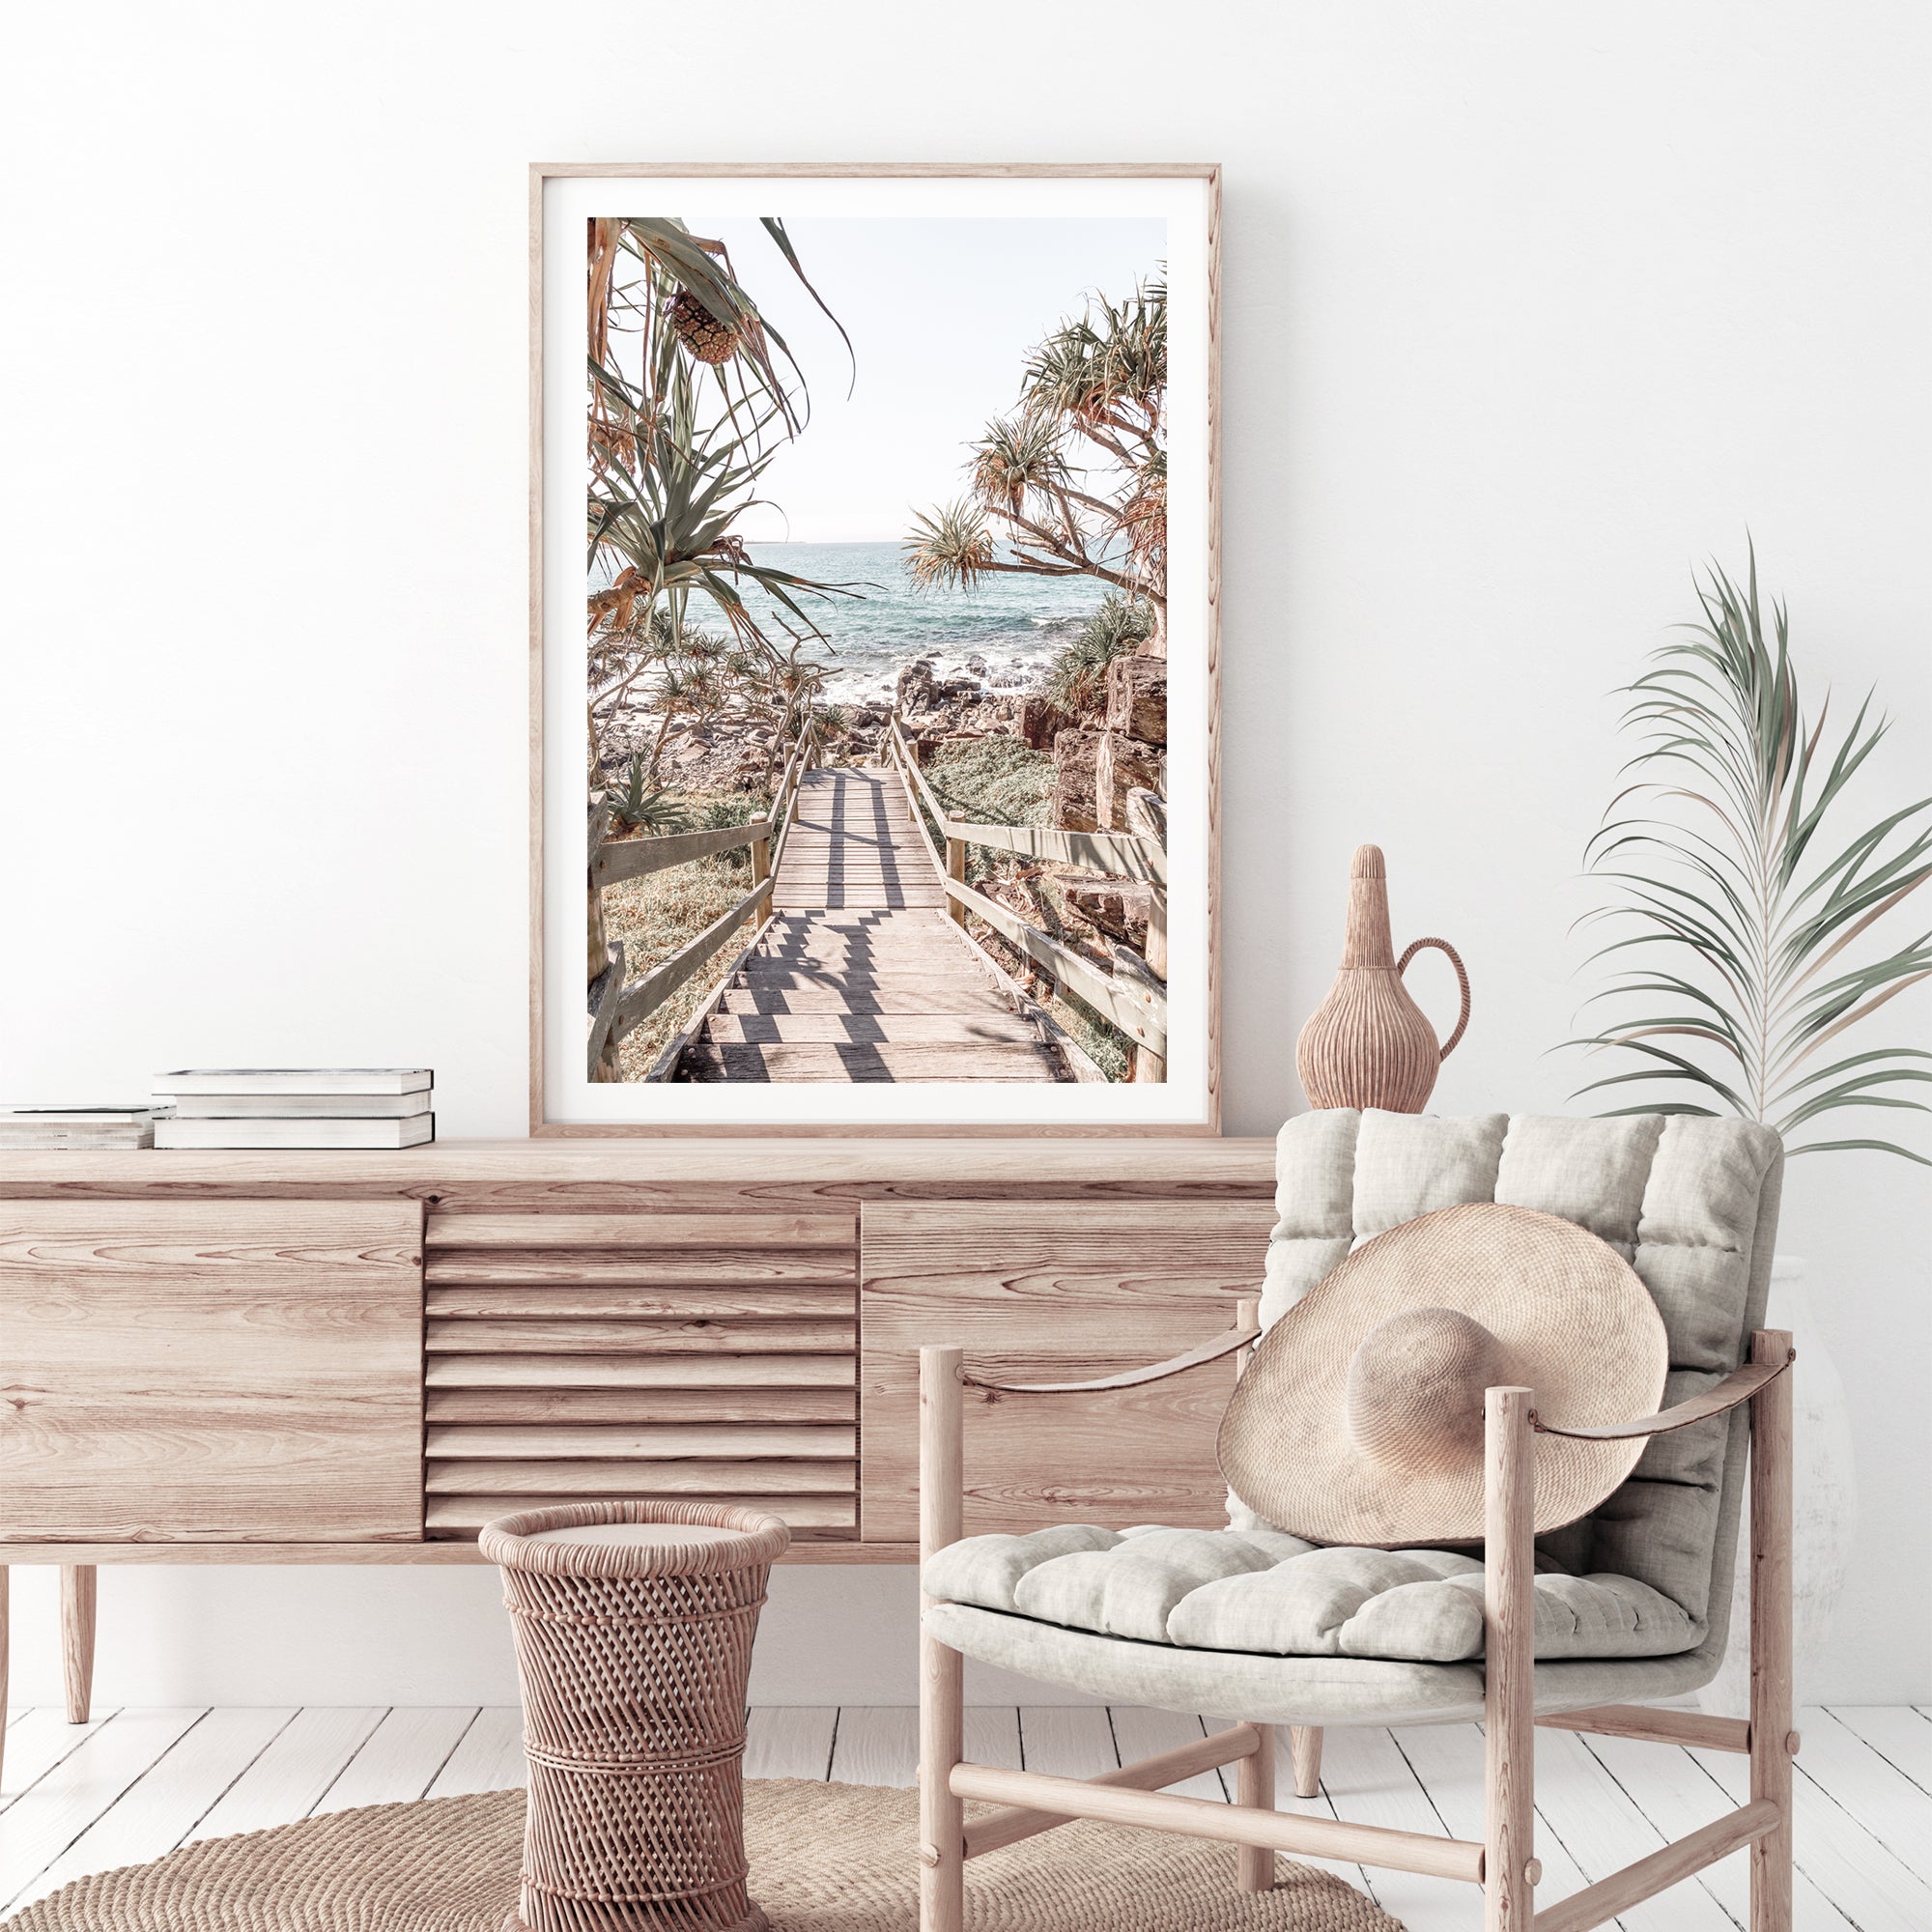 Stetched canvas wall art print of stairs to the beach , available unframed or with a timber, black or white frame.